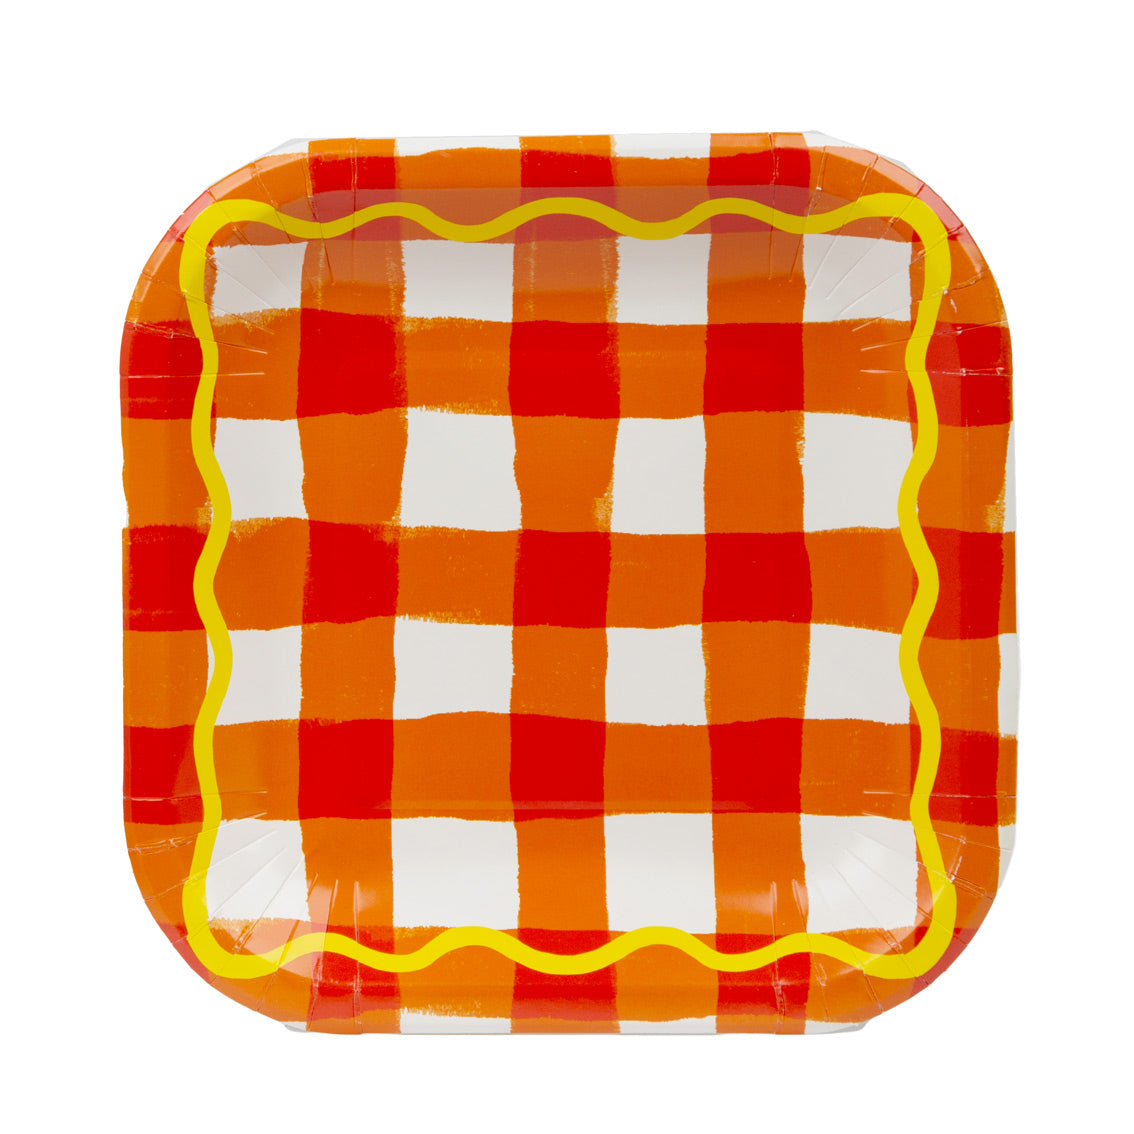 EVERYONE'S WELCOME SQUARE PAPER
PLATES 17CM 12PK